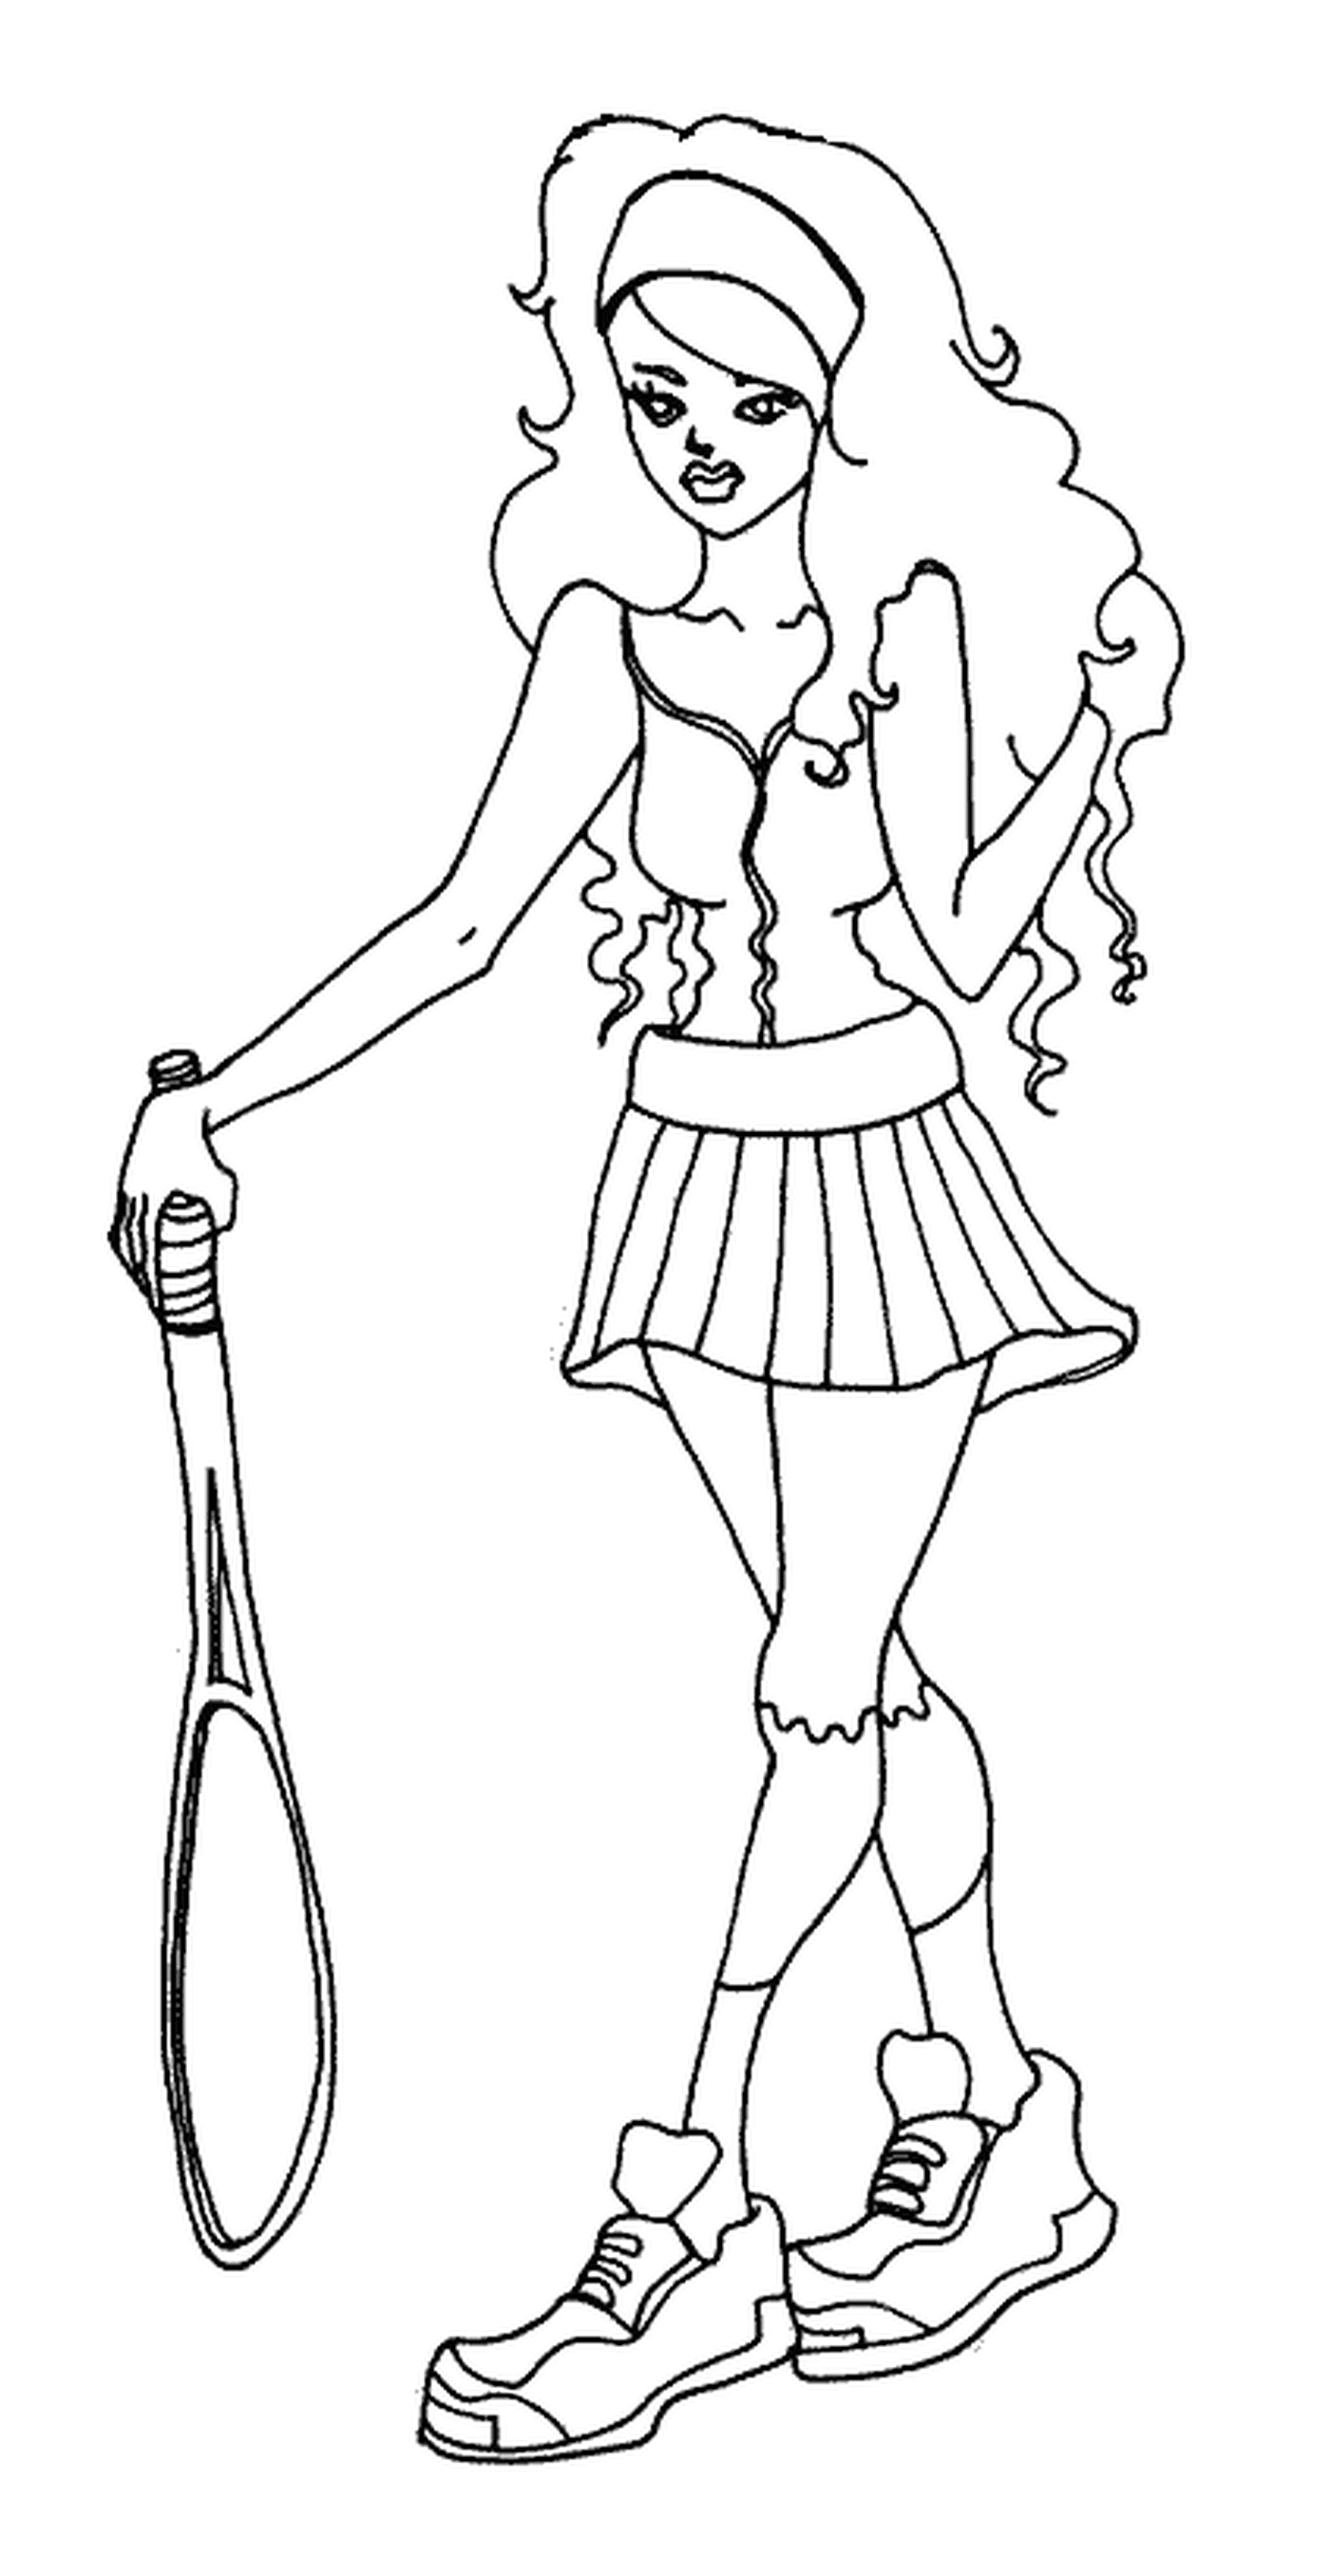 coloriage tennis joueuse